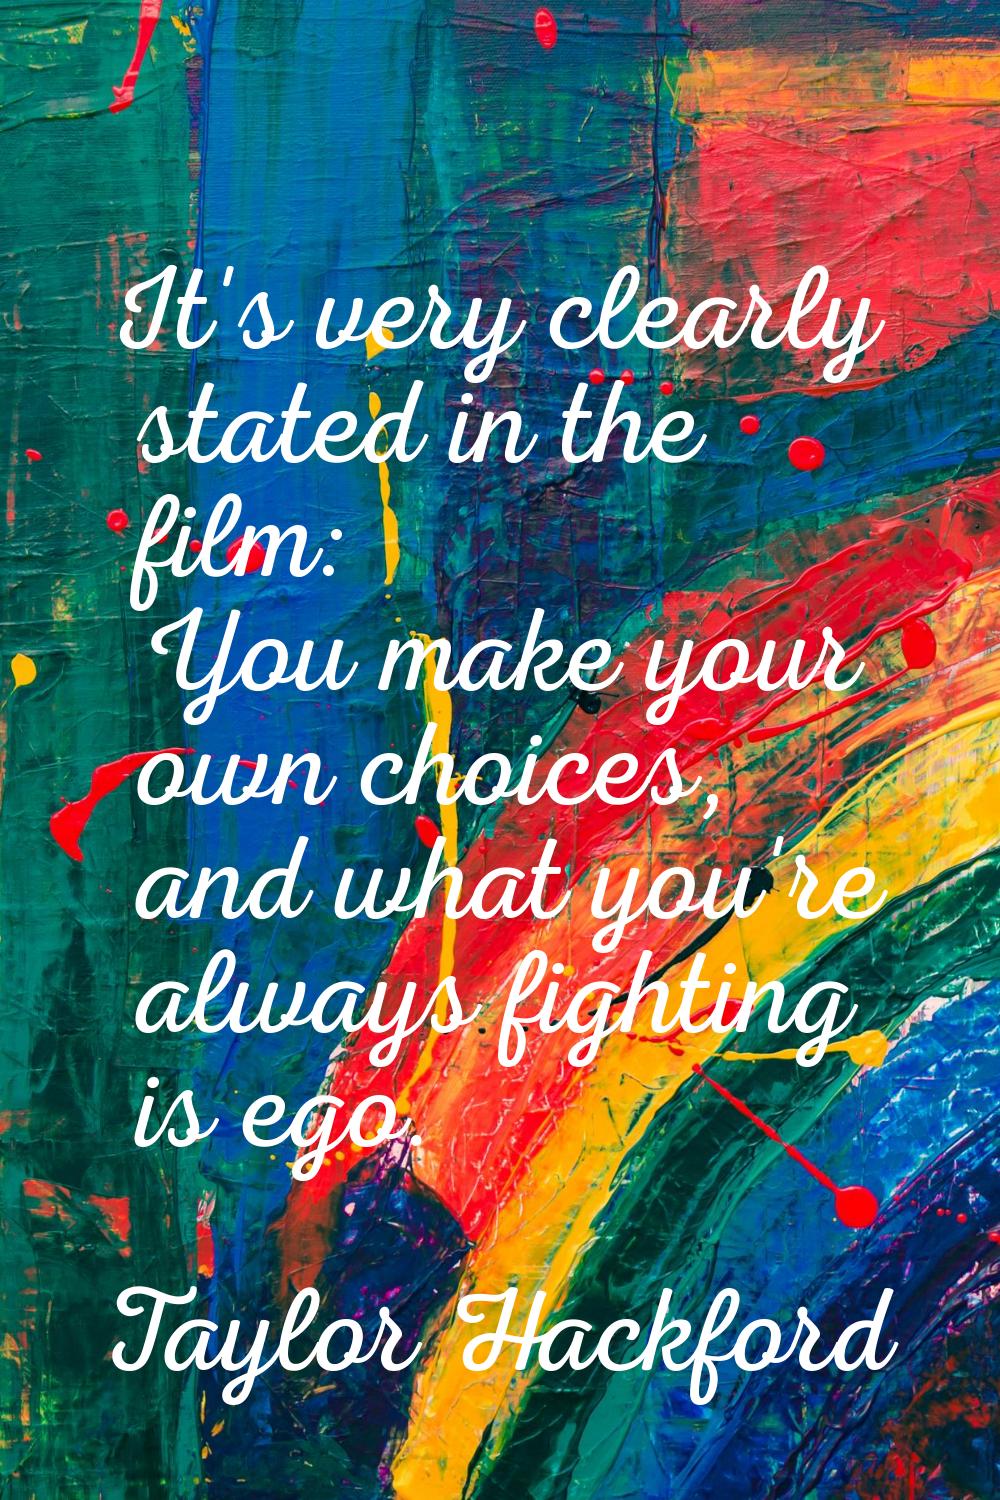 It's very clearly stated in the film: You make your own choices, and what you're always fighting is